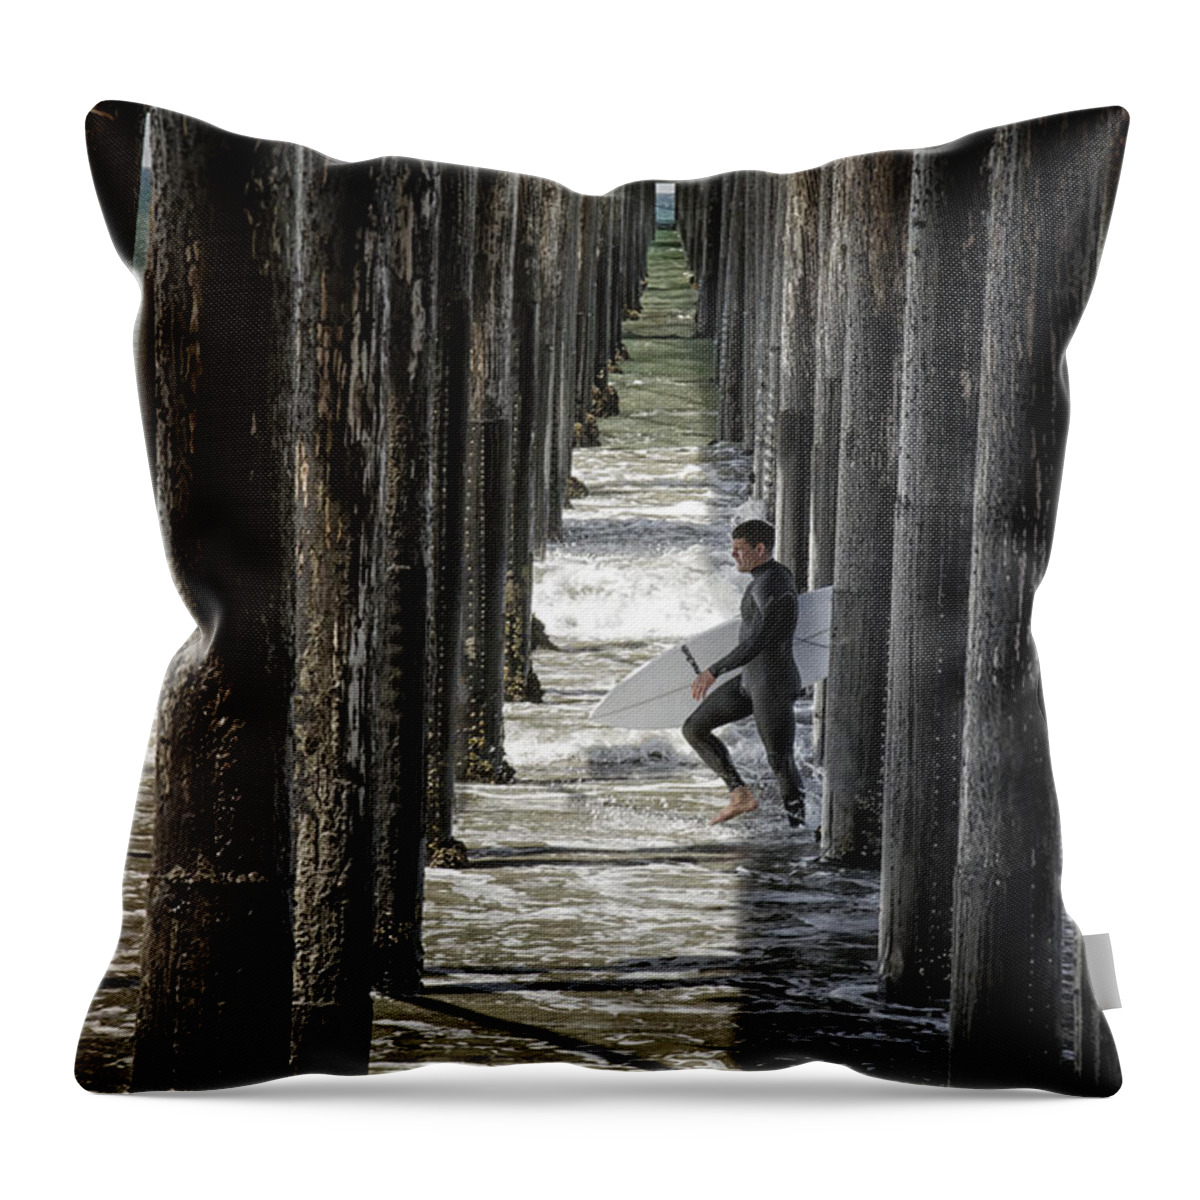 Oceanside Throw Pillow featuring the photograph Just Passing Through by Joan Carroll